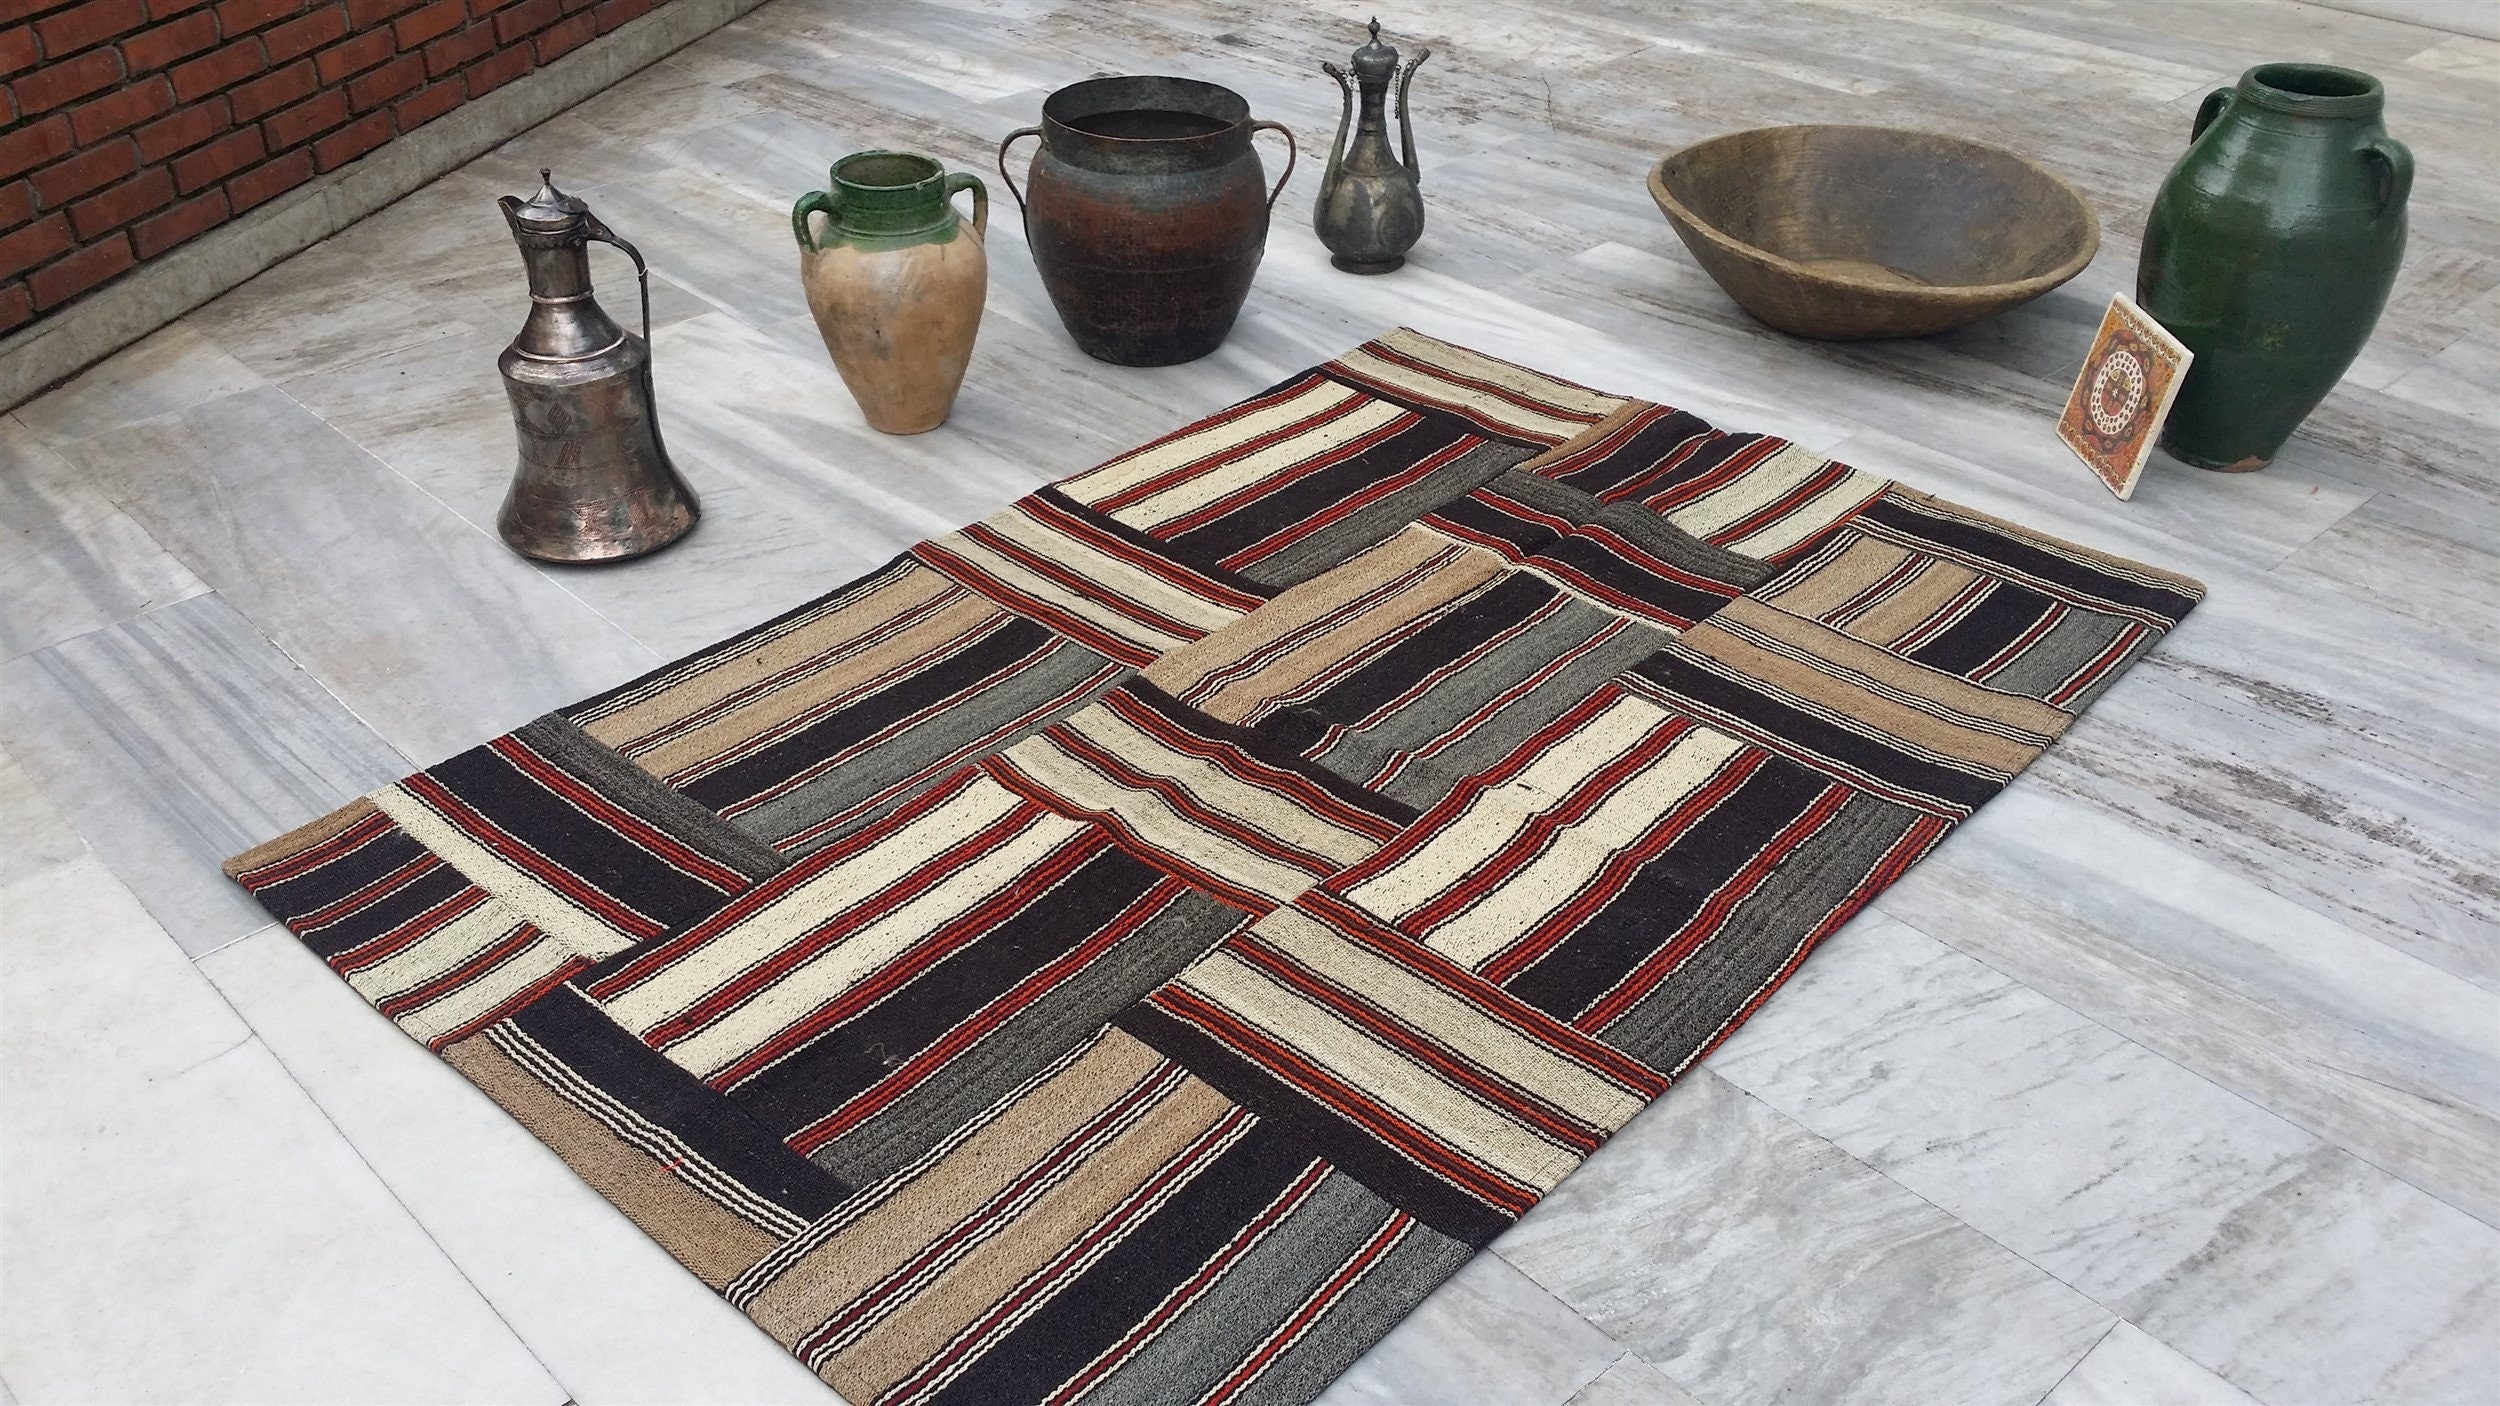 Patchwork Kilim Rug 5 ft 10 in x 3 ft 11 in Brown Grey and White Turkish Rug